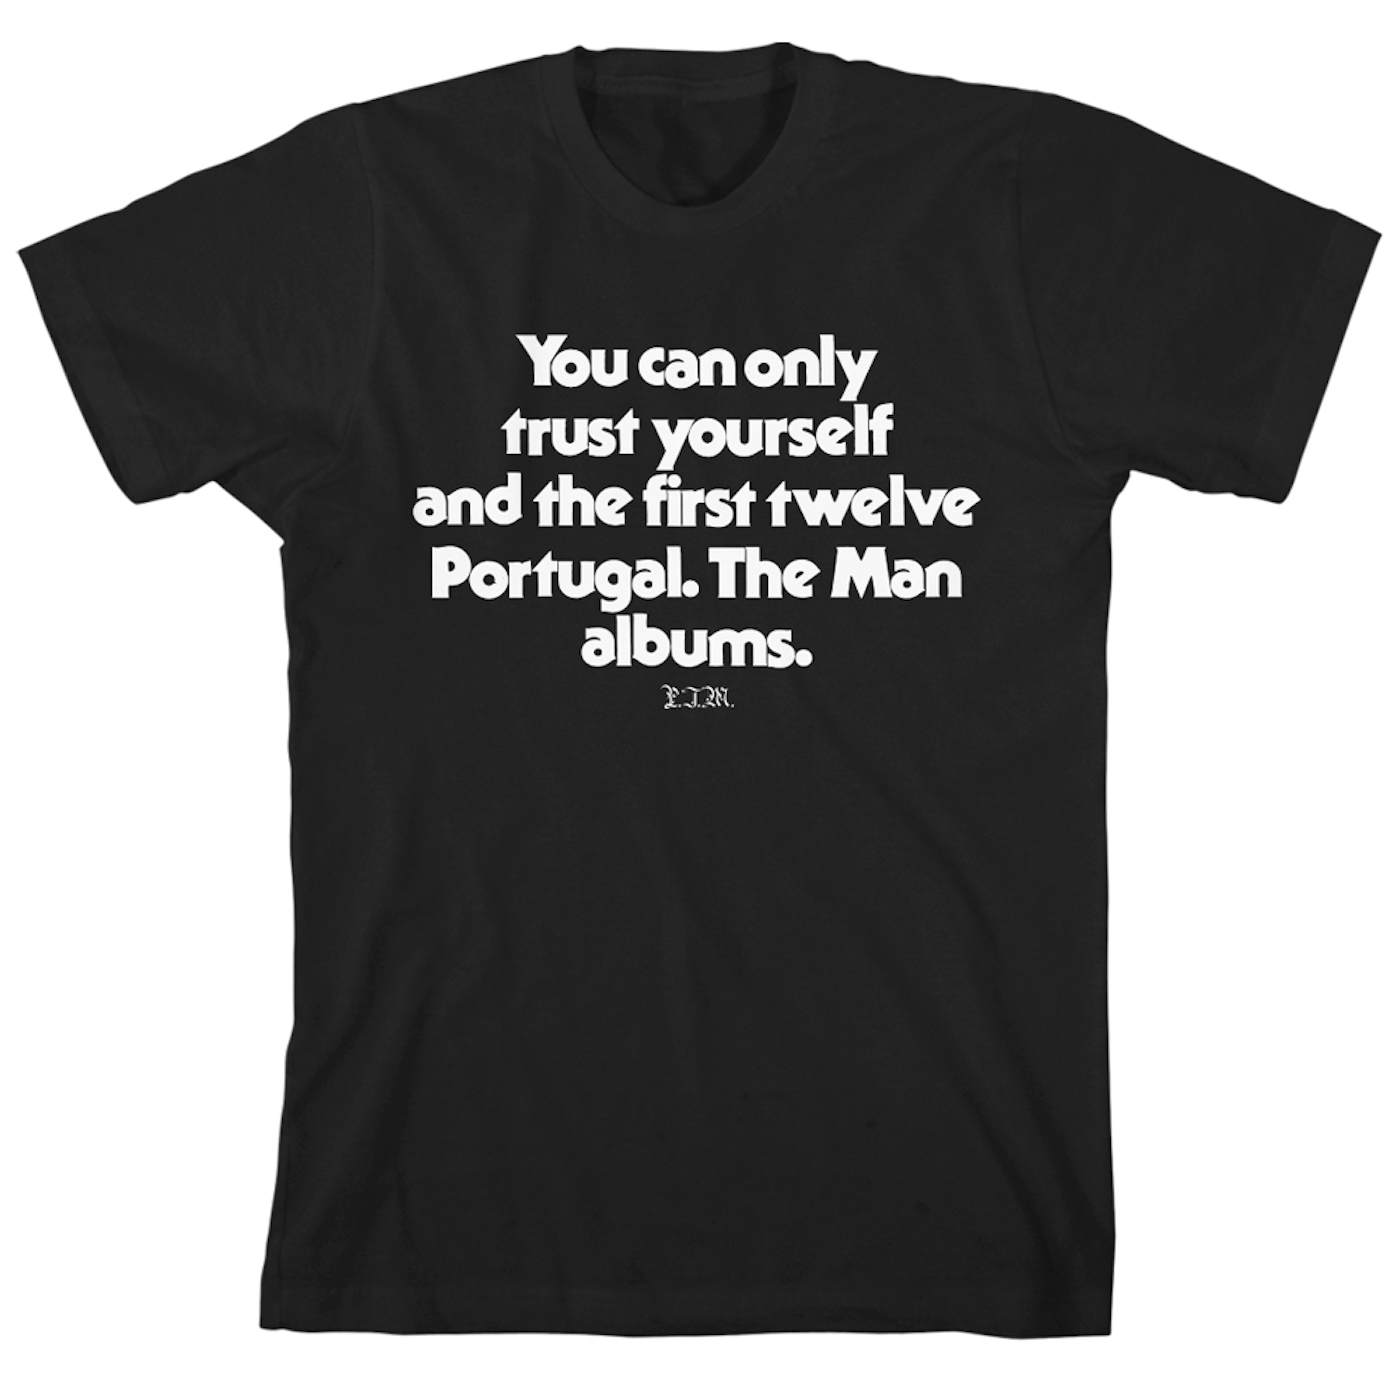 Portugal. The Man Albums T-Shirt